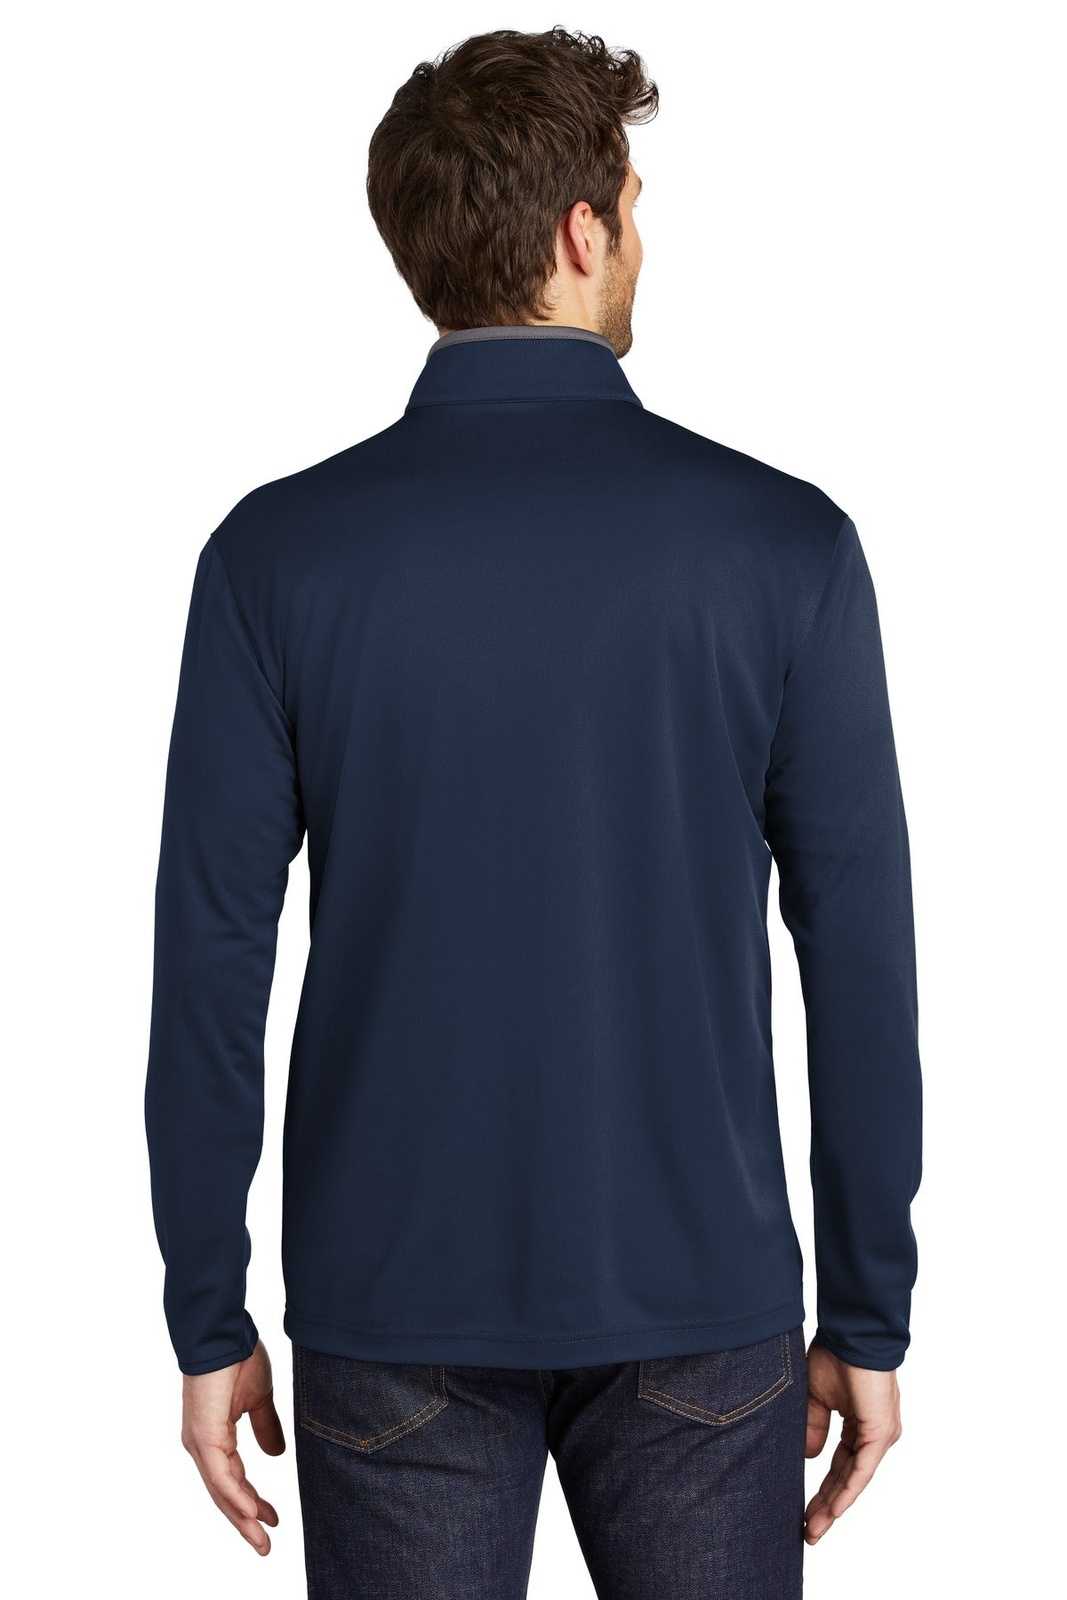 Port Authority K584 Silk Touch Performance 1/4-Zip K584Navy Steel Gray - HIT a Double - 1